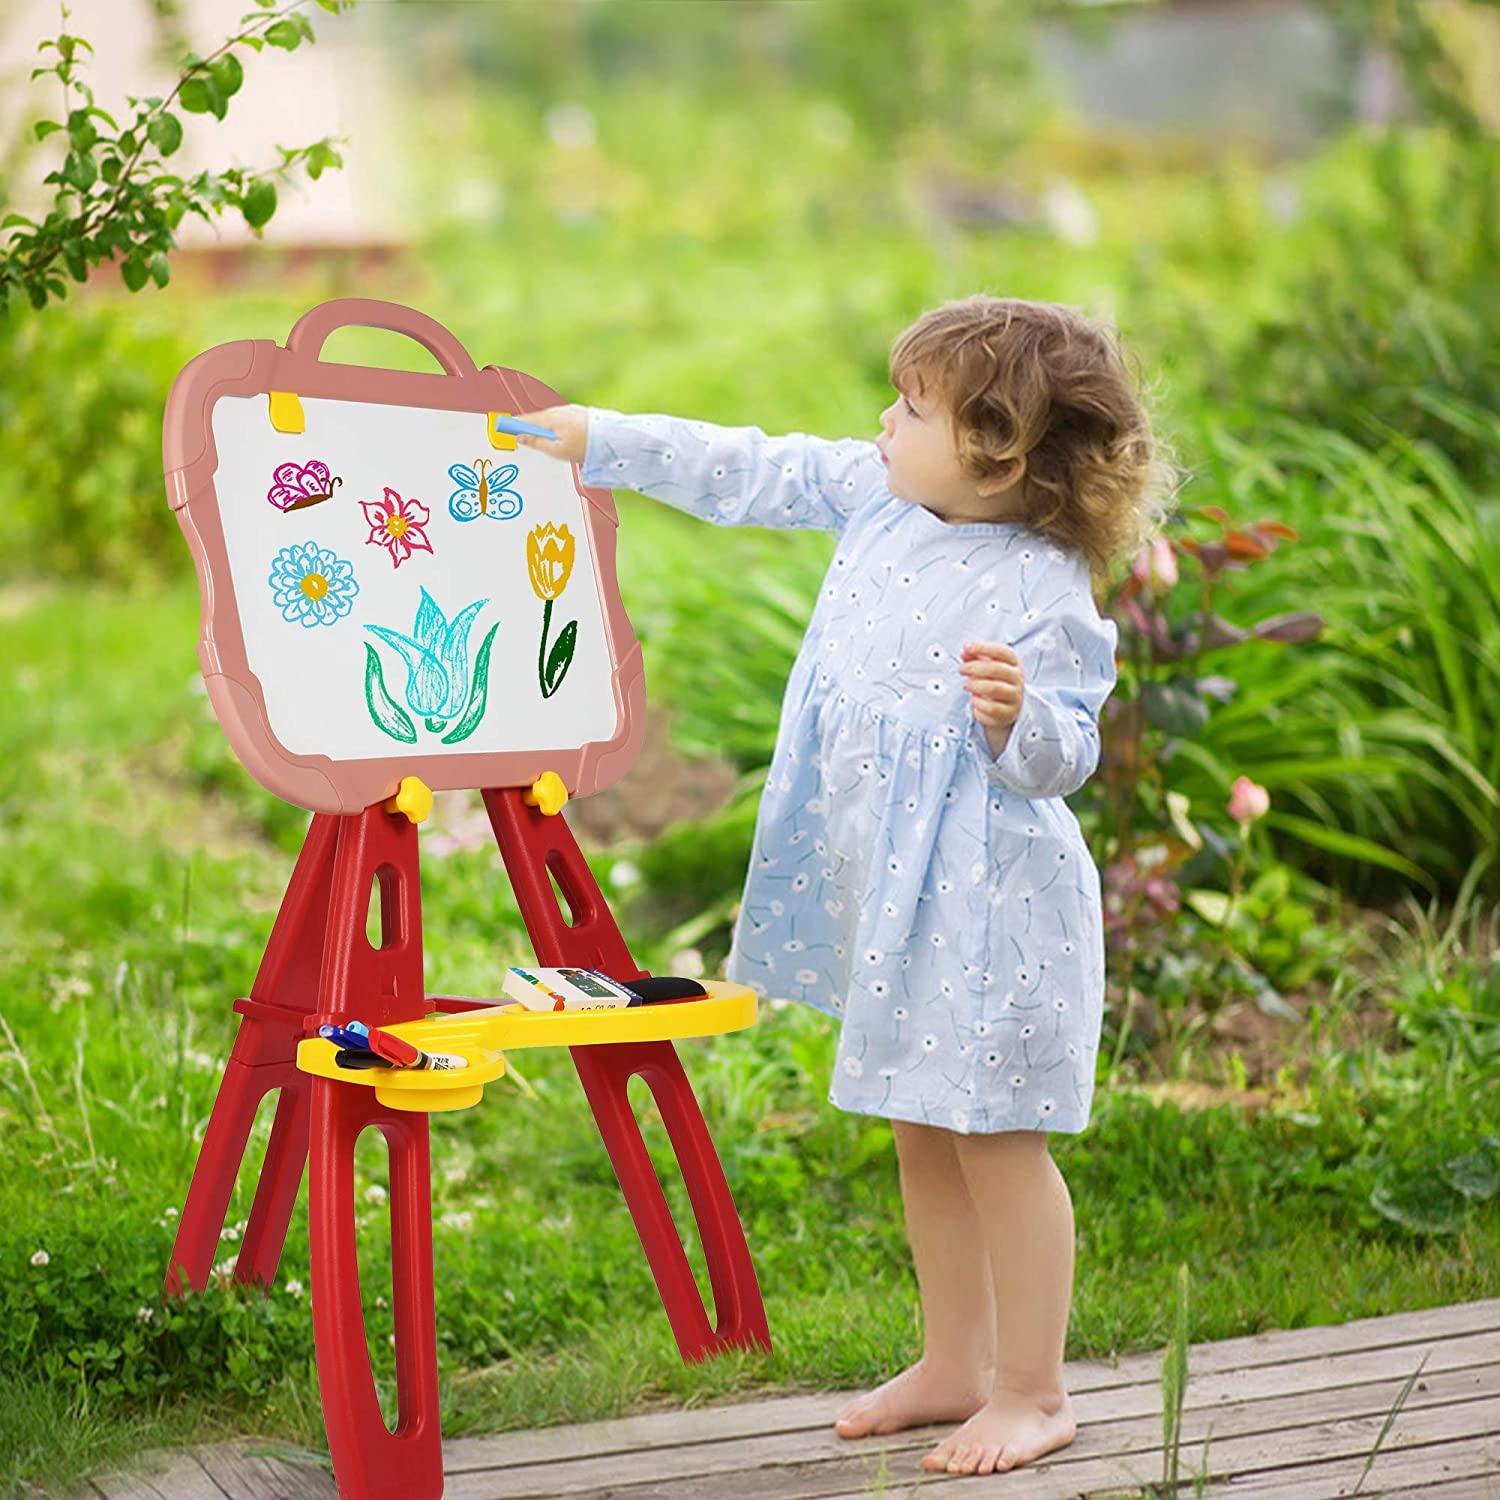 Standing Easel Board For Kids, 3 in 1 Dry Erase White Board, Magnetic Board And Chalkboard Art Activity Drawing With Extra Accessories For Kids, Red - Bosonshop